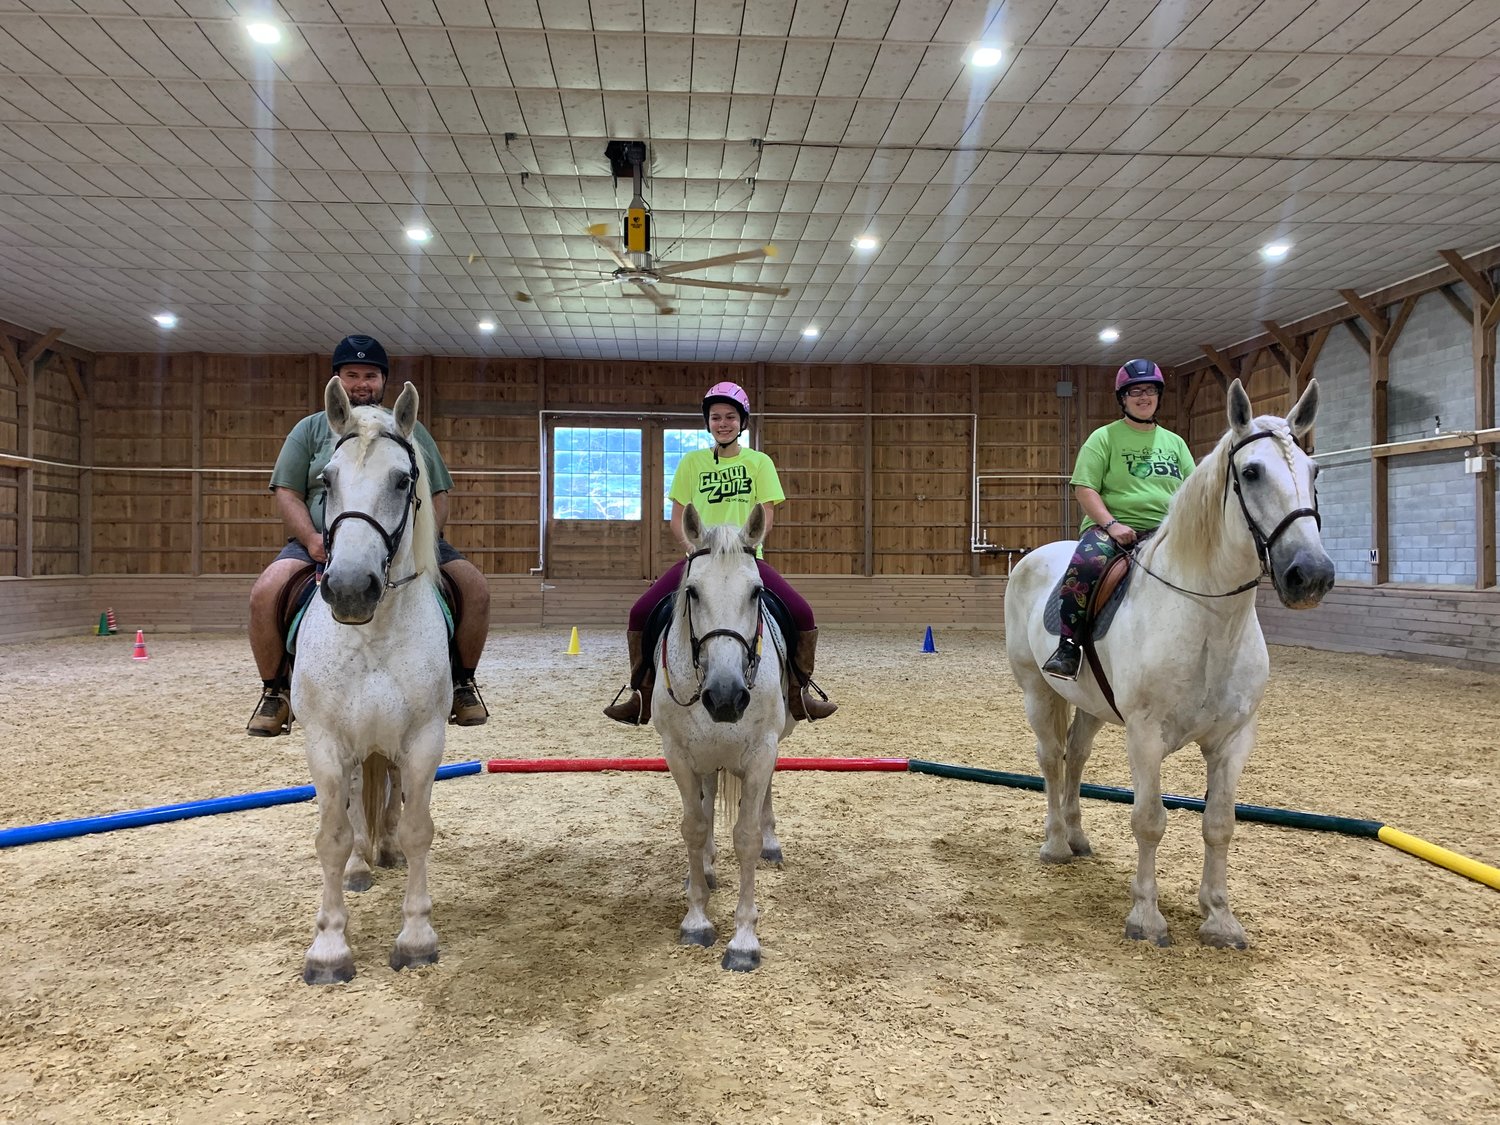 Ivy Hill Therapeutic Equestrian Center